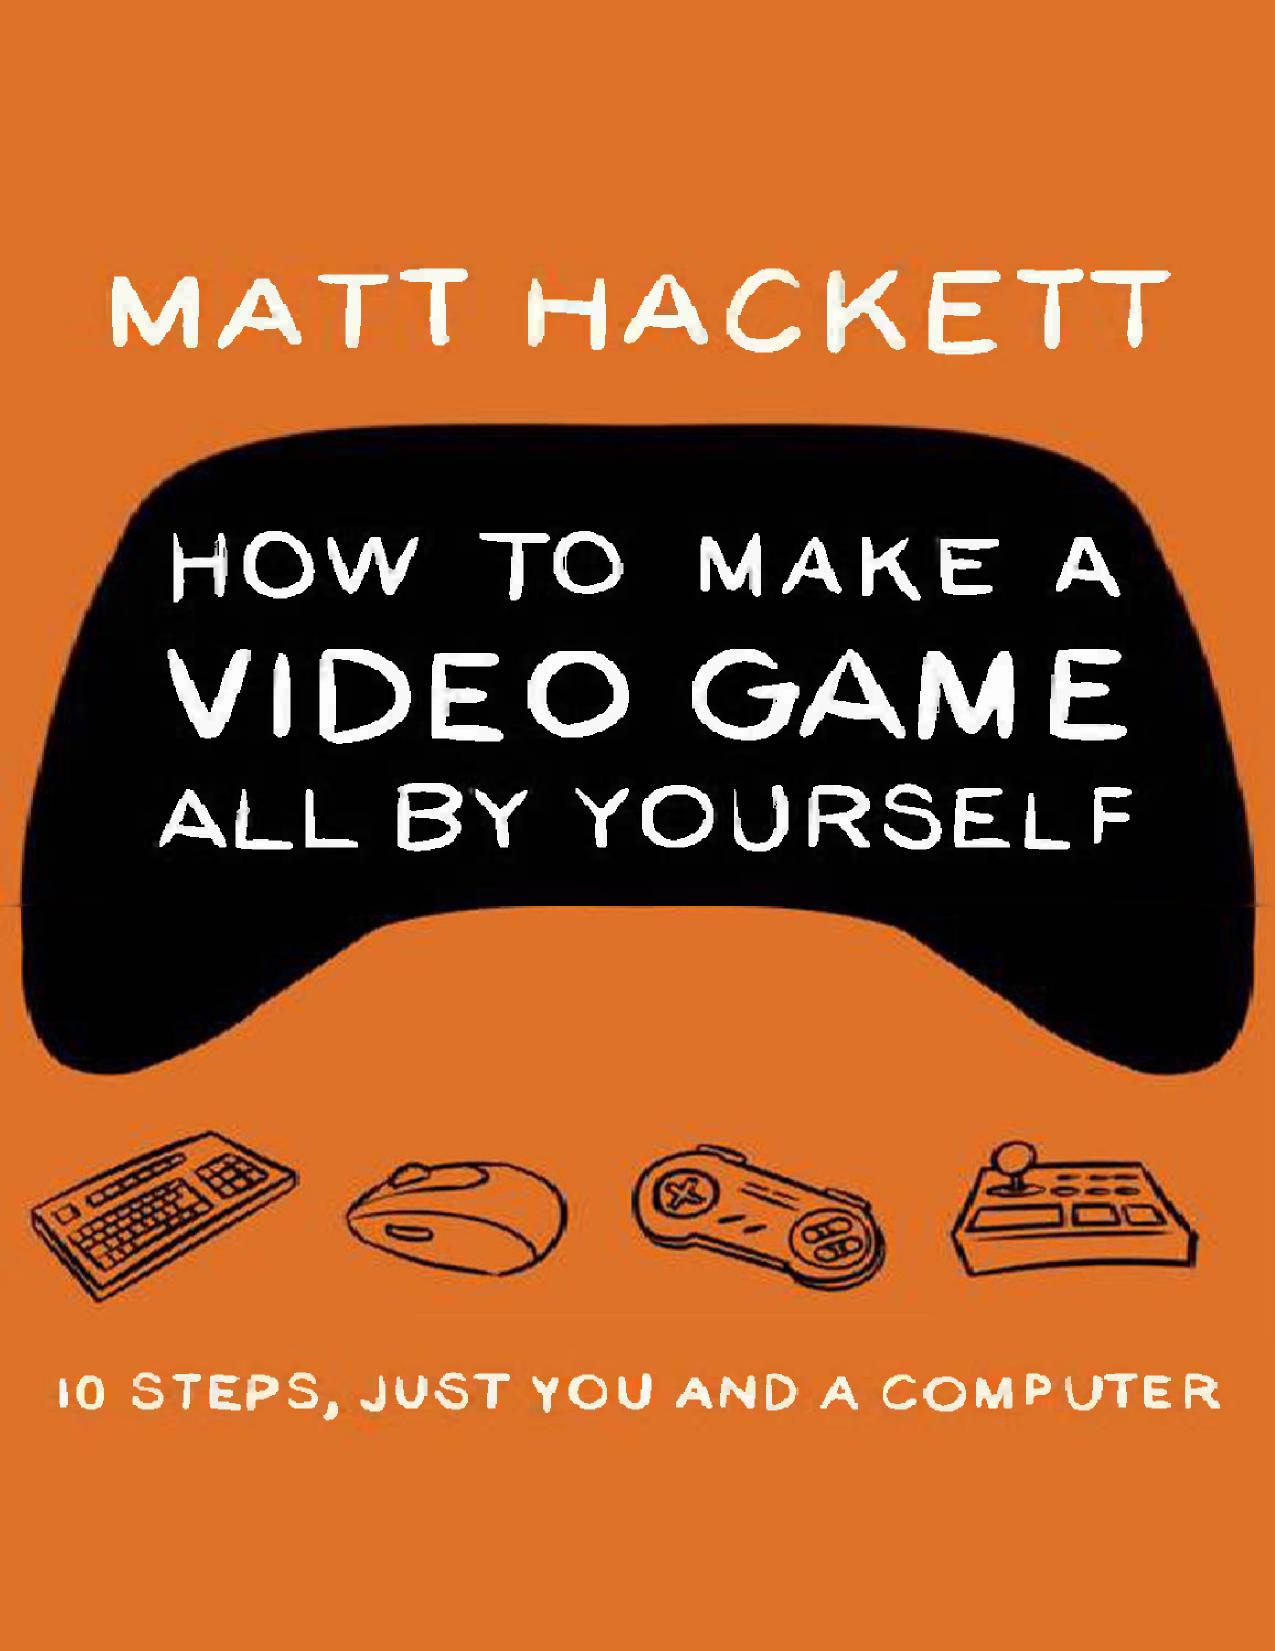 How to Make a Video Game All By Yourself: 10 steps, just you and a computer by Matt Hackett